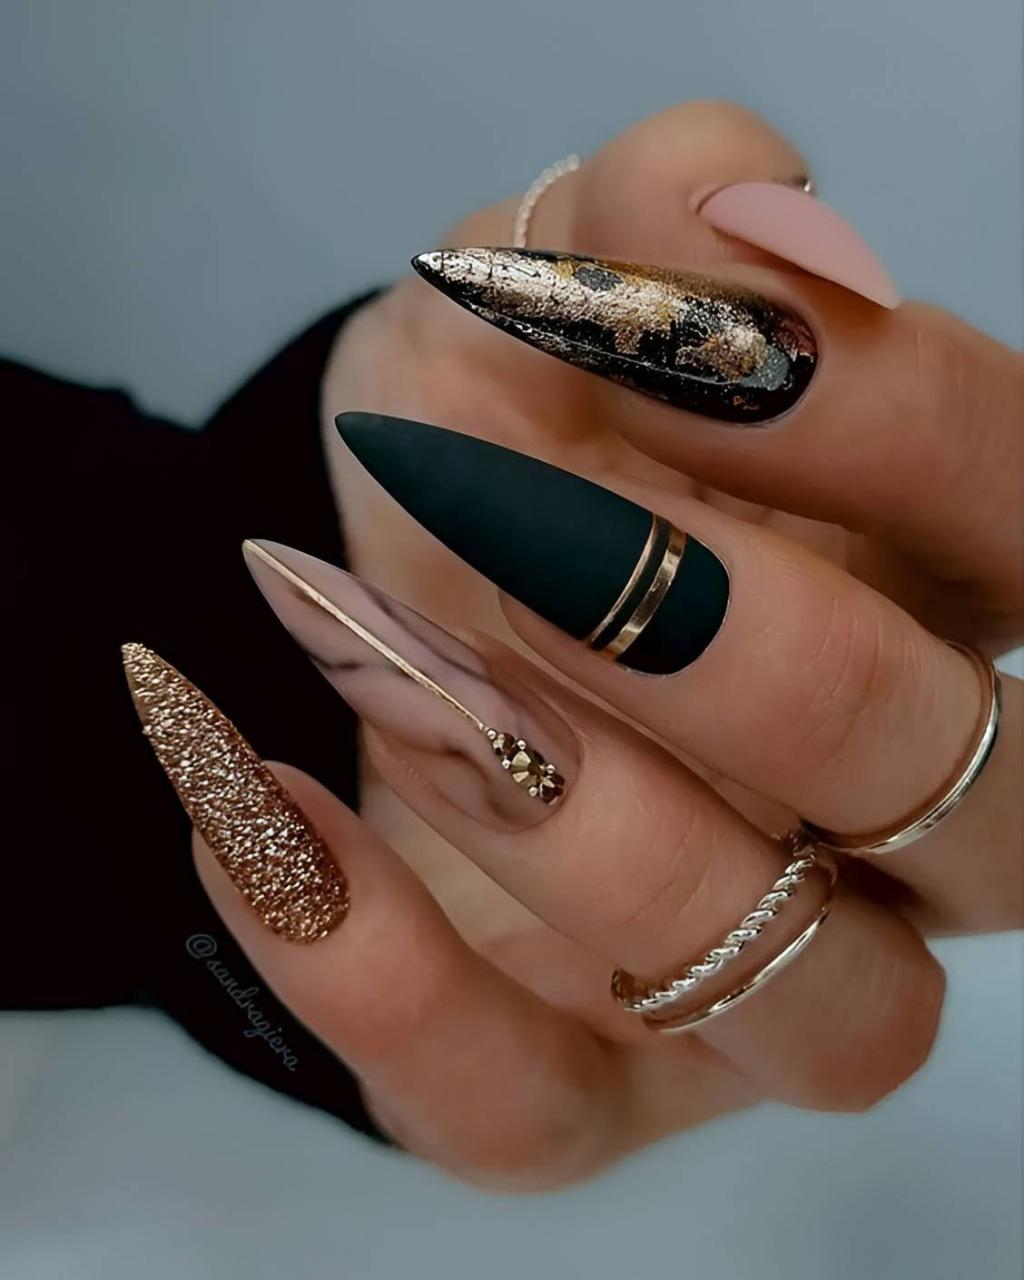 30 Classy Black Nail Designs To Glam You Up - 245